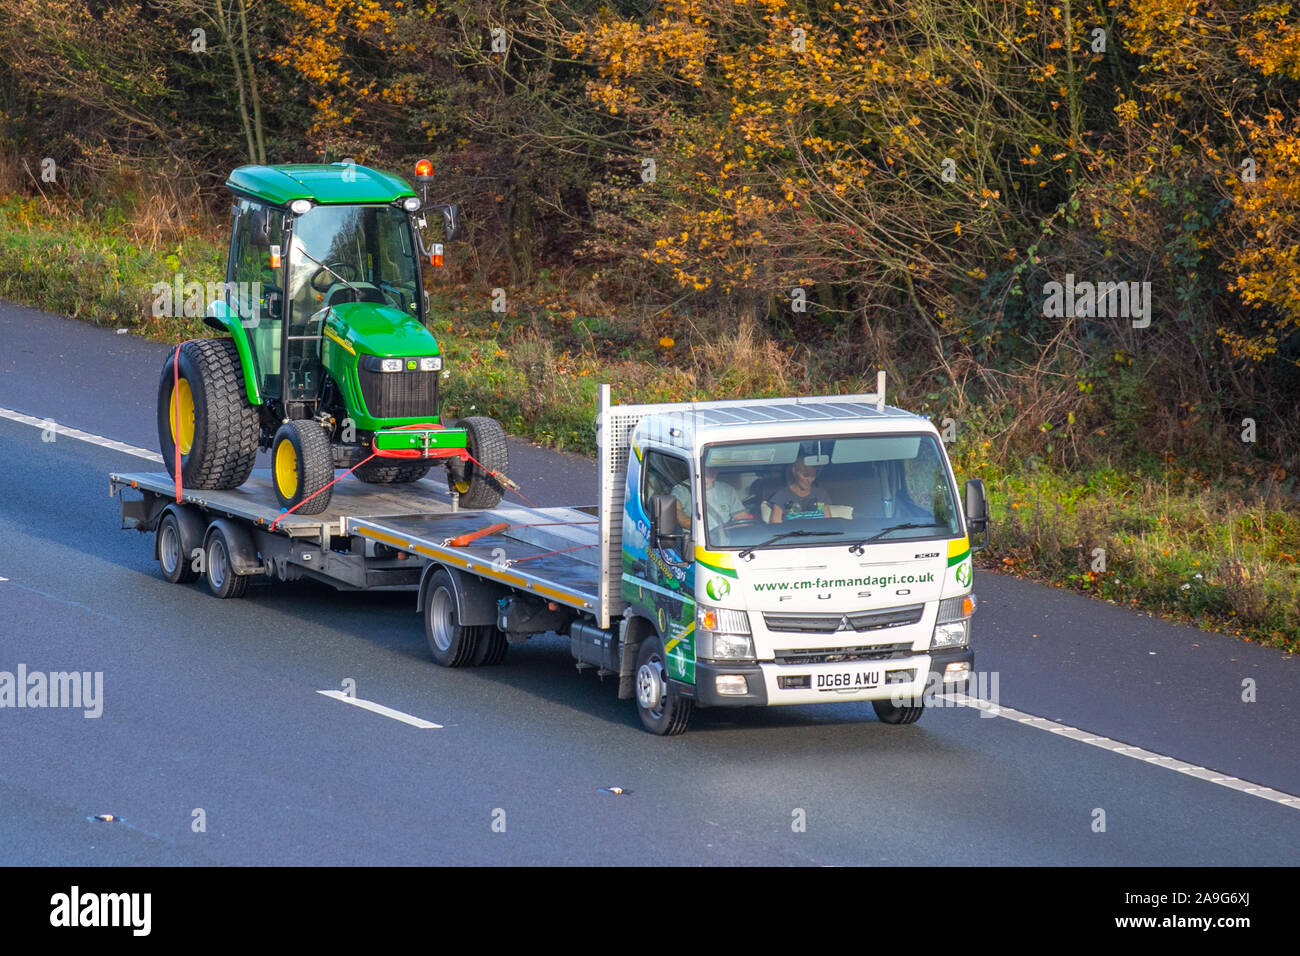 2018 white Mitsubishi Fuso Canter 3c15 38 Auto transporting JohnDeere 4520; Haulage delivery trucks, lorry, transportation, farm tractor on truck, cargo, vehicle, delivery, commercial transport, industry, on the M61 at Chorley, UK Stock Photo